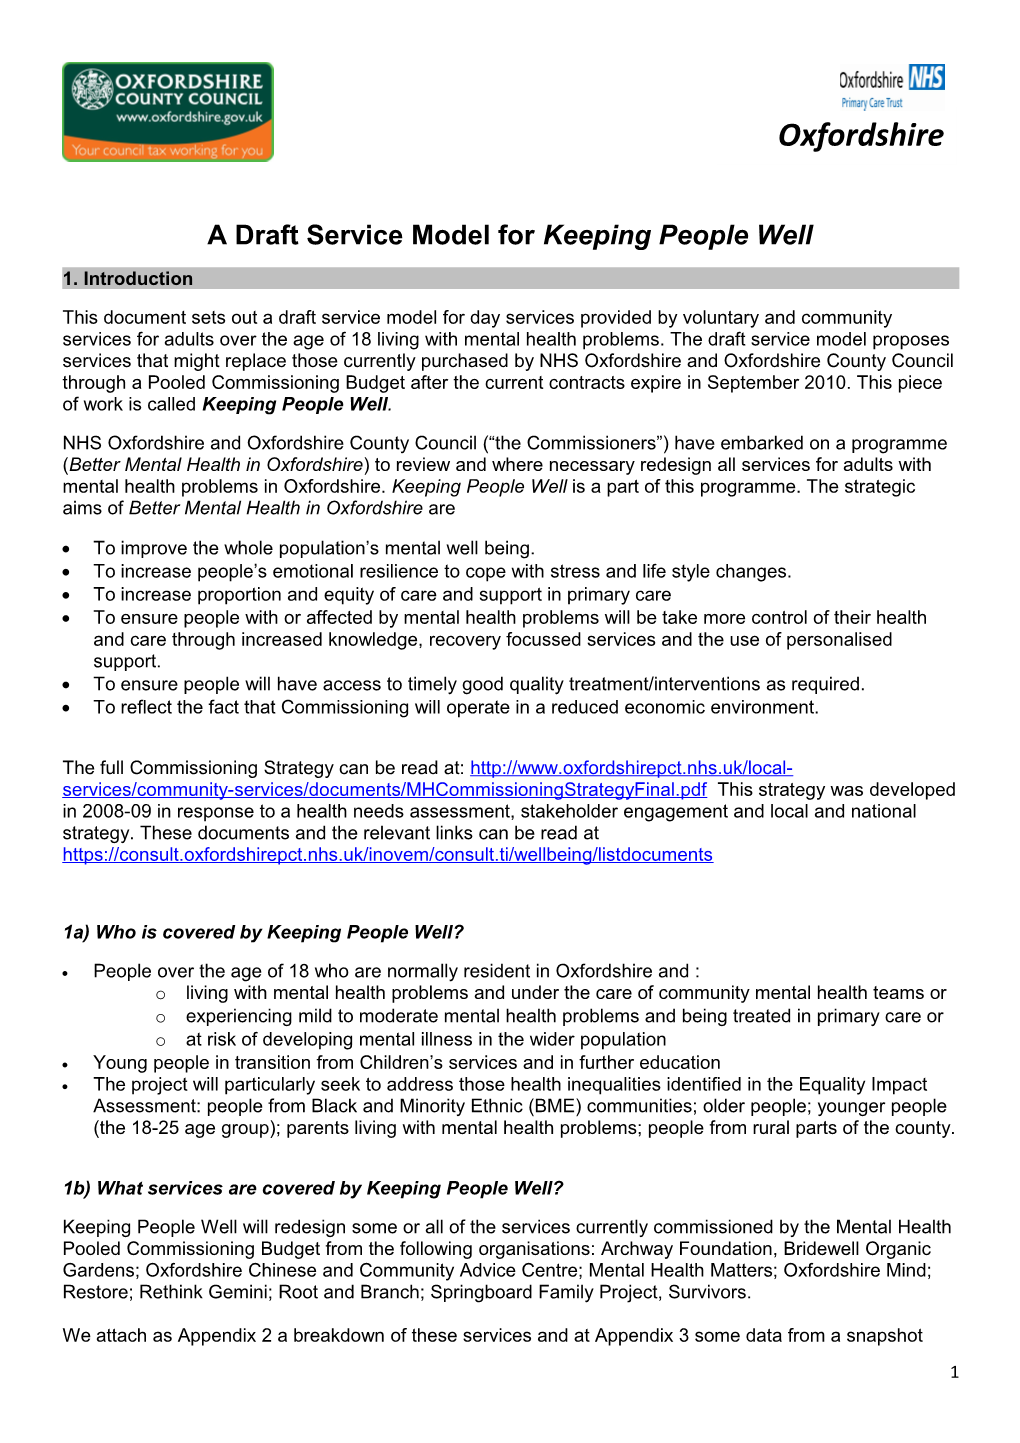 Consultation Document: a Draft Service Model for Keeping People Well